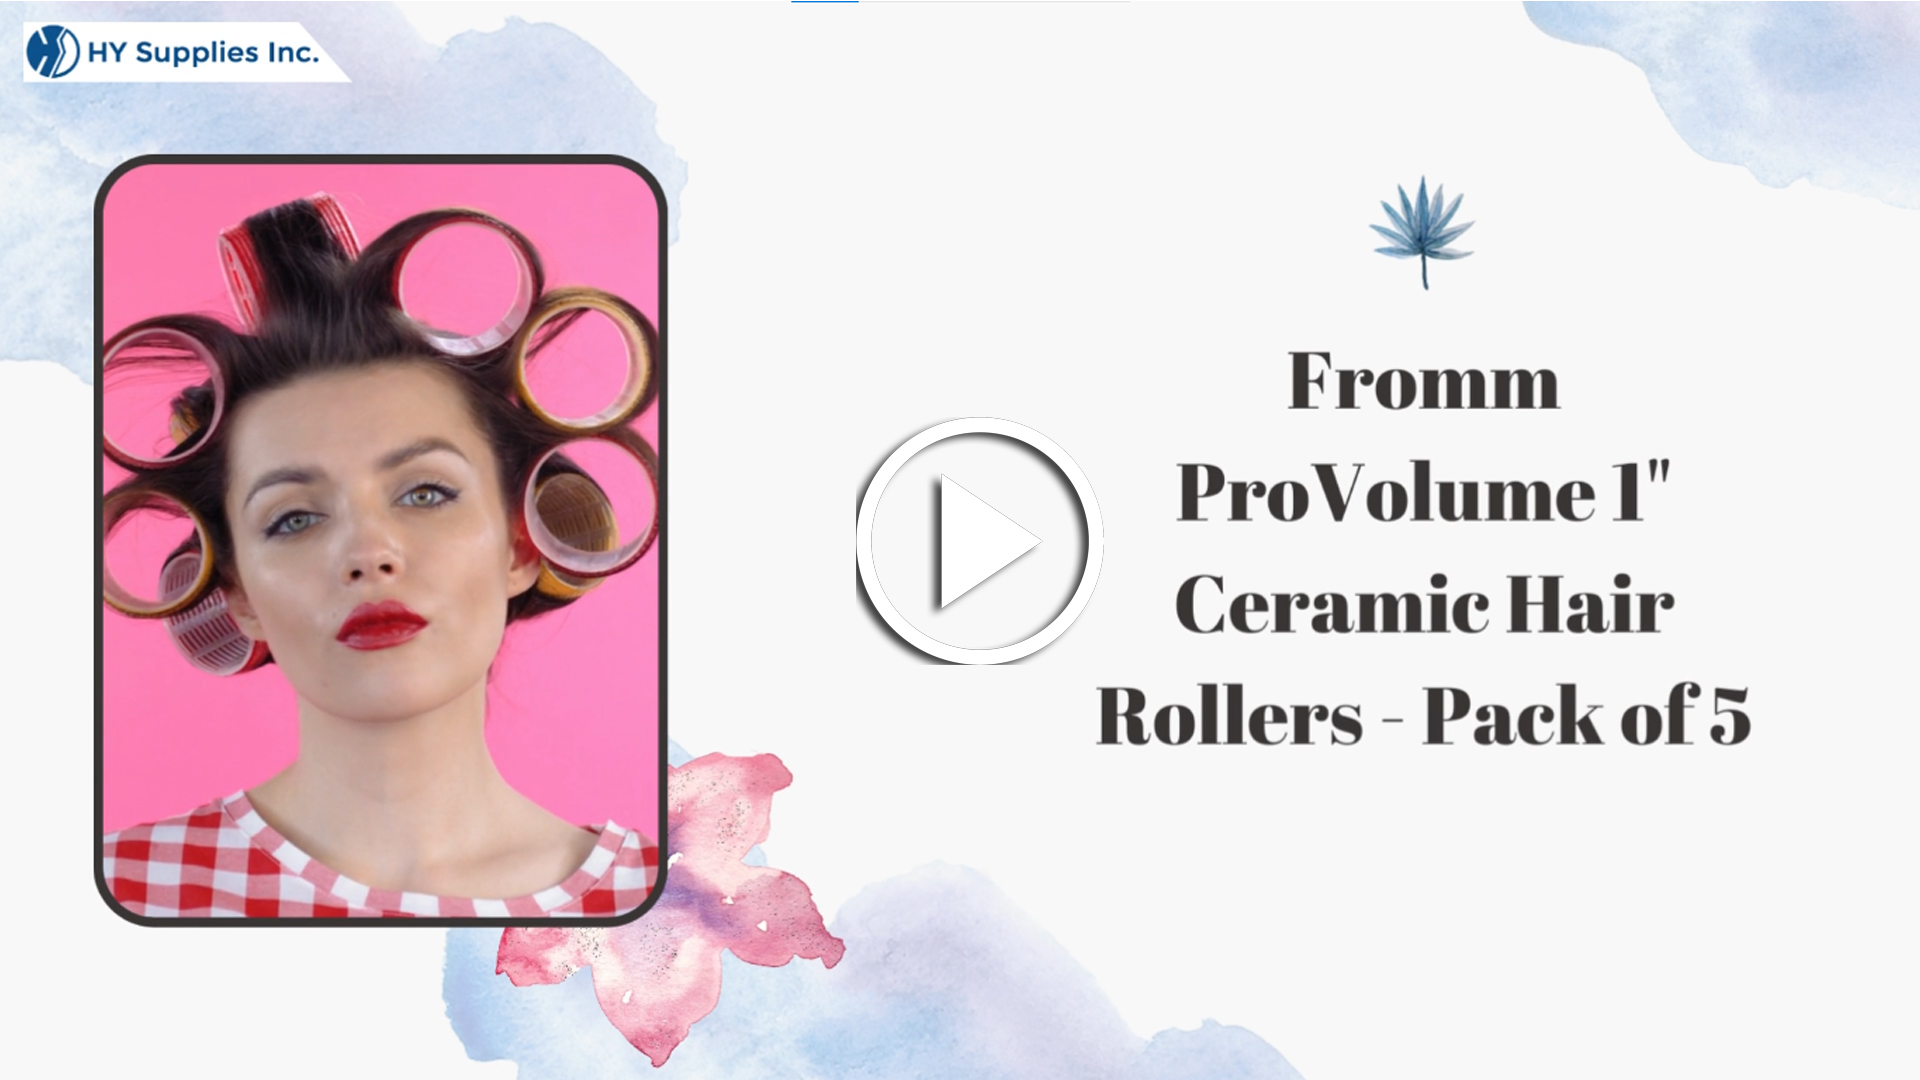 Fromm ProVolume 1" Ceramic Hair Rollers - Pack of 5